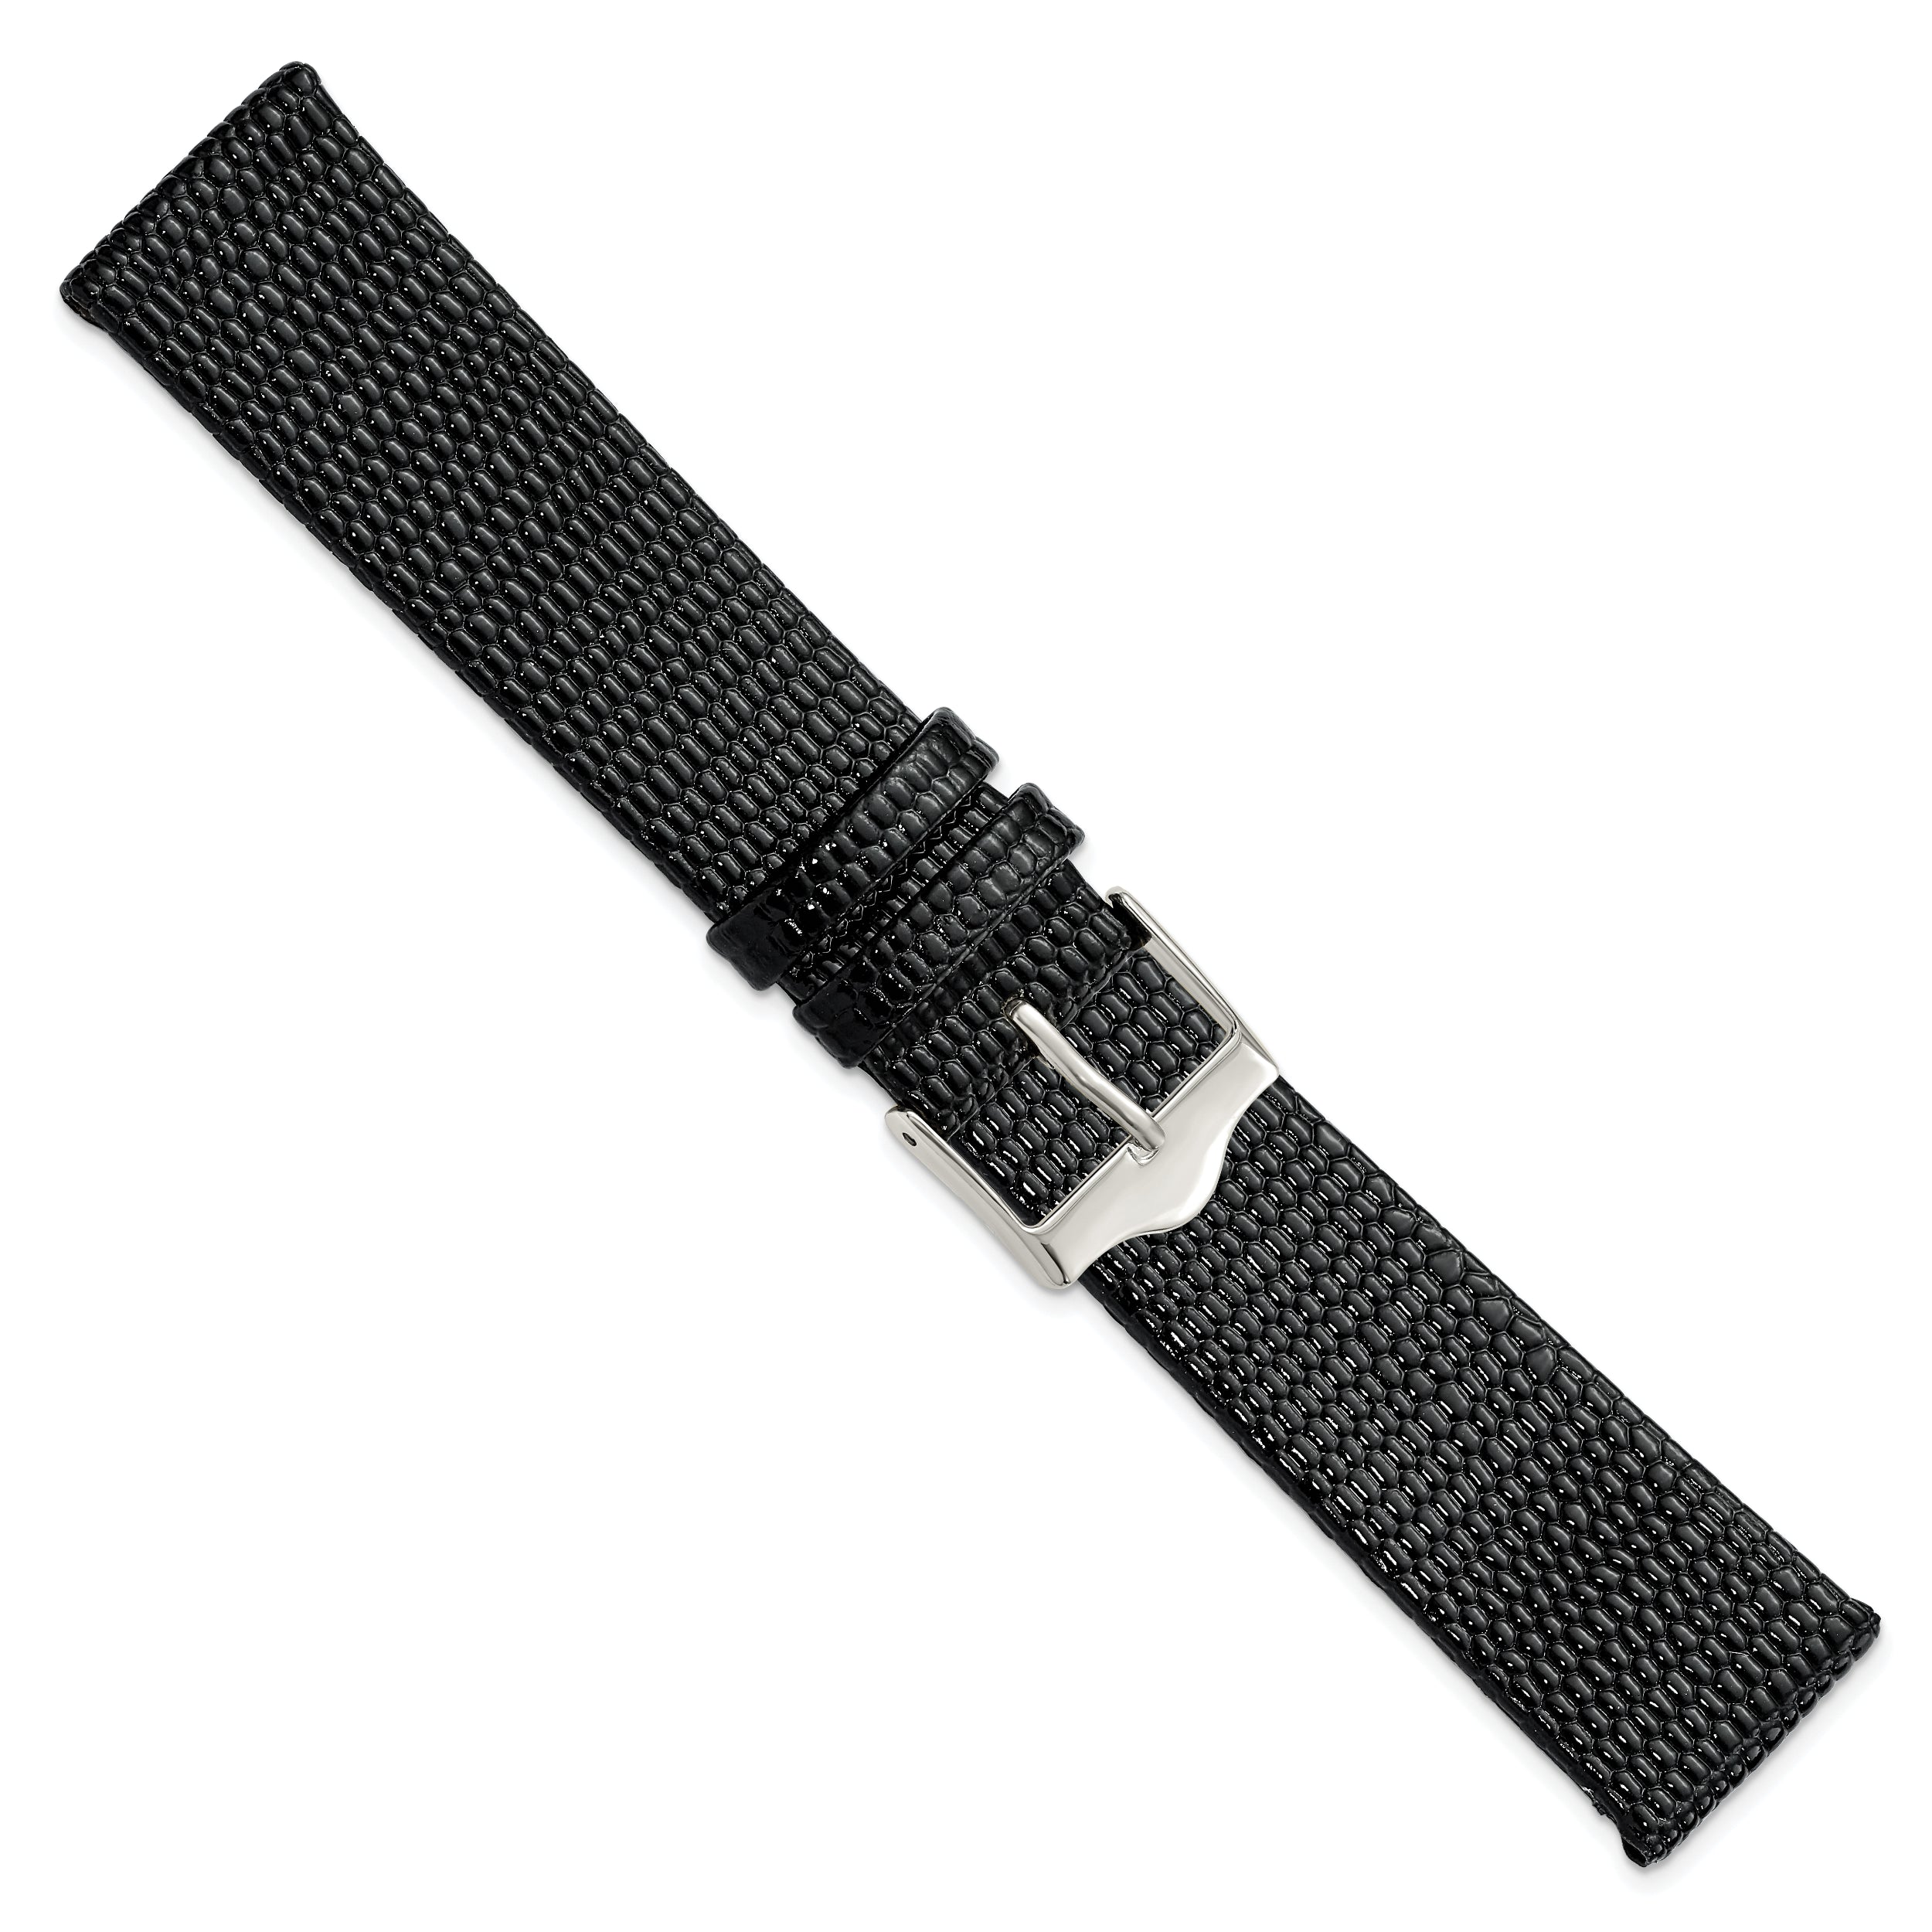 12mm Flat Black Lizard Grain Leather with Silver-tone Buckle 6.75 inch Watch Band